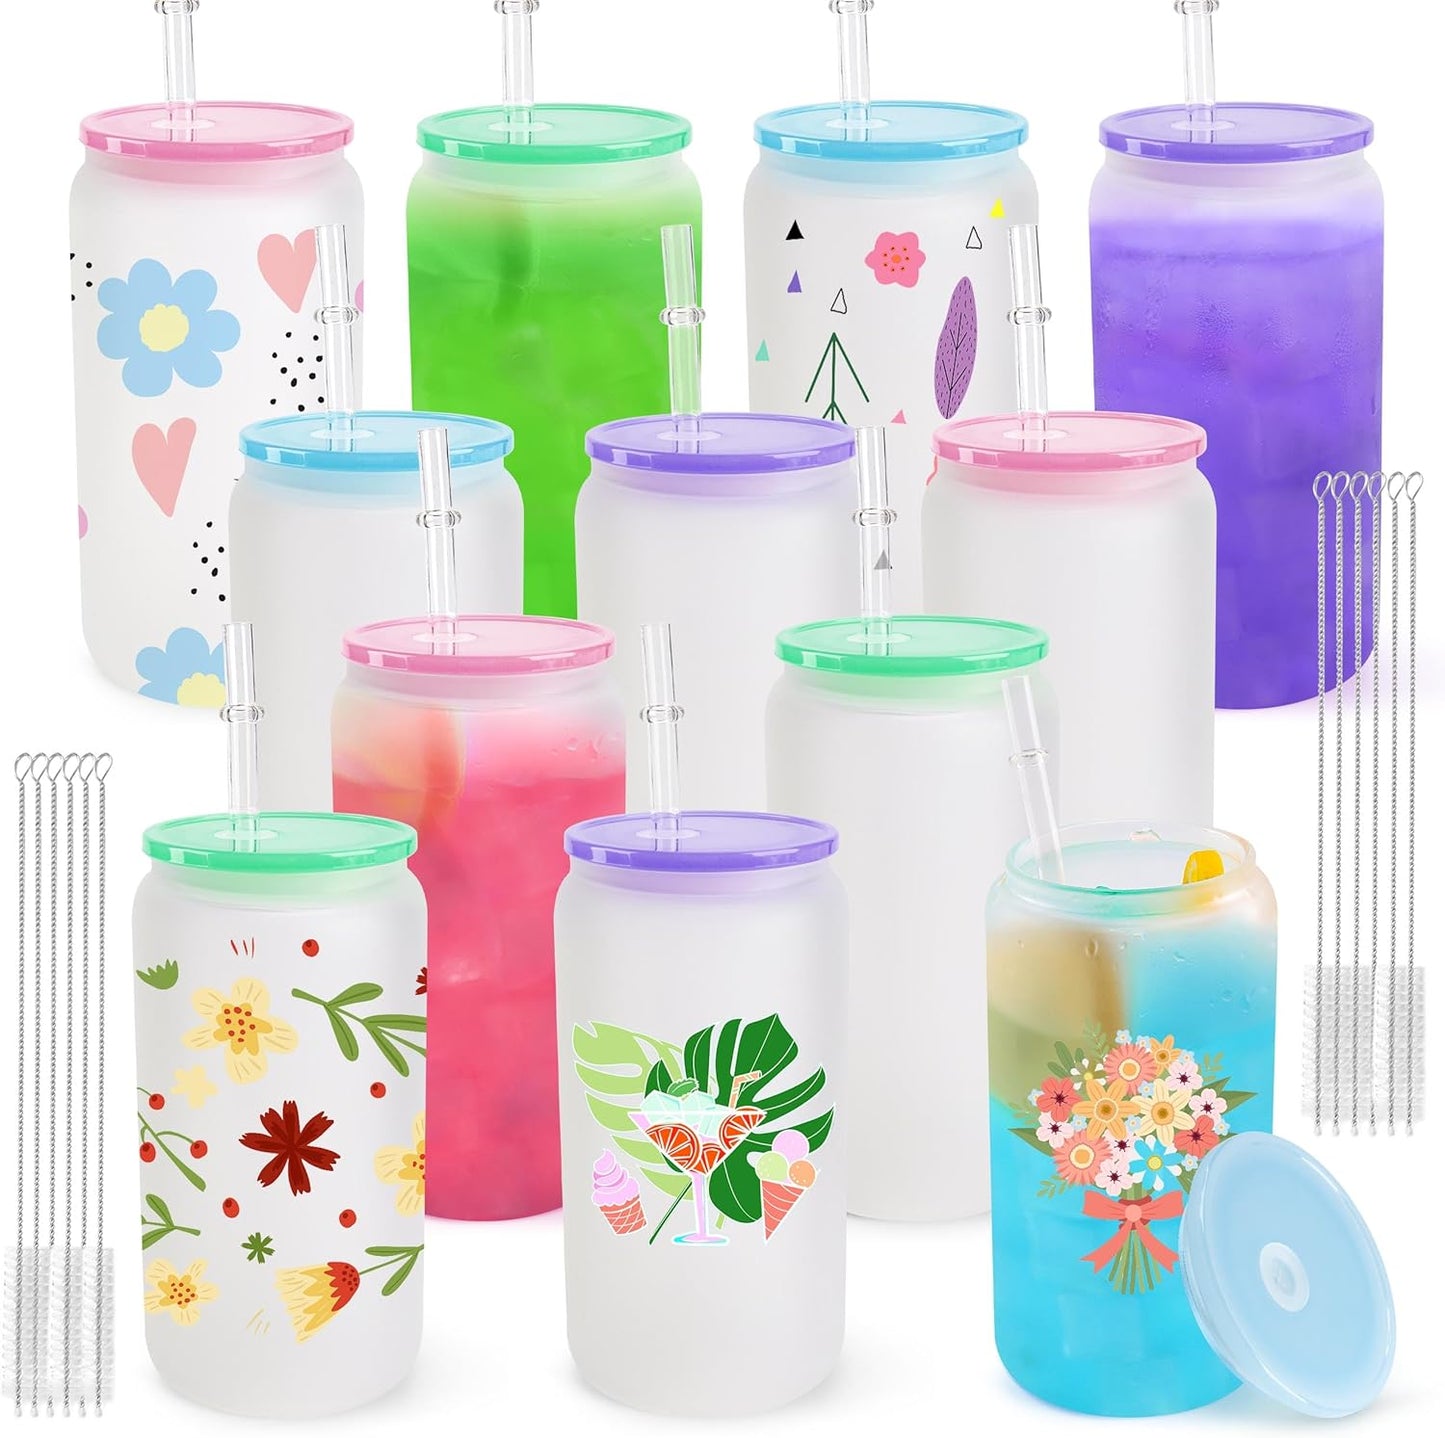 Sublimation Frosted Glass Cups Blanks with Acrylic Lids ( Multi Light Lids )